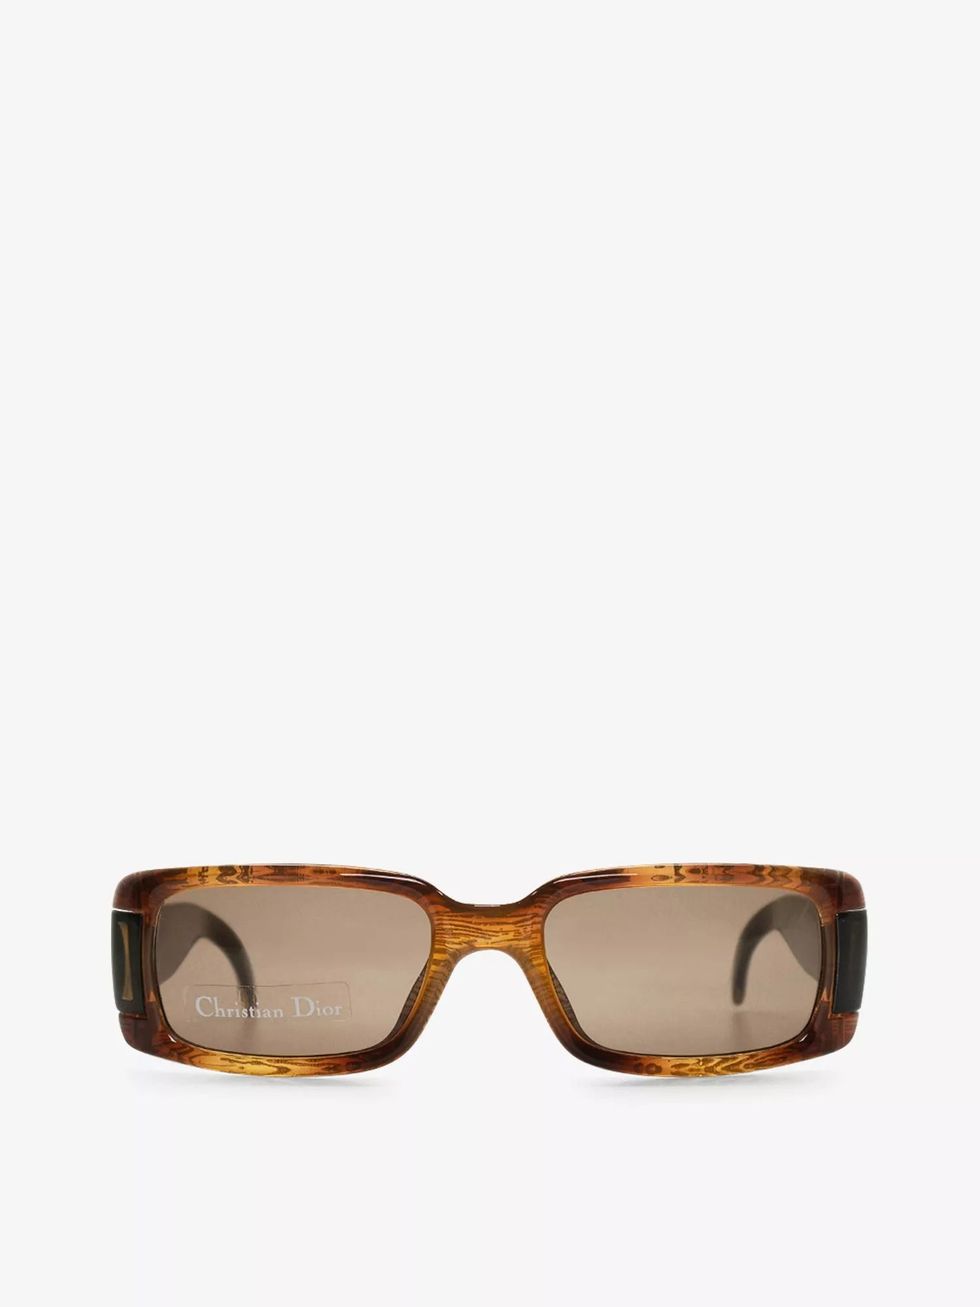 rectangle-frame acetate sunglasses from The Vintage Trap